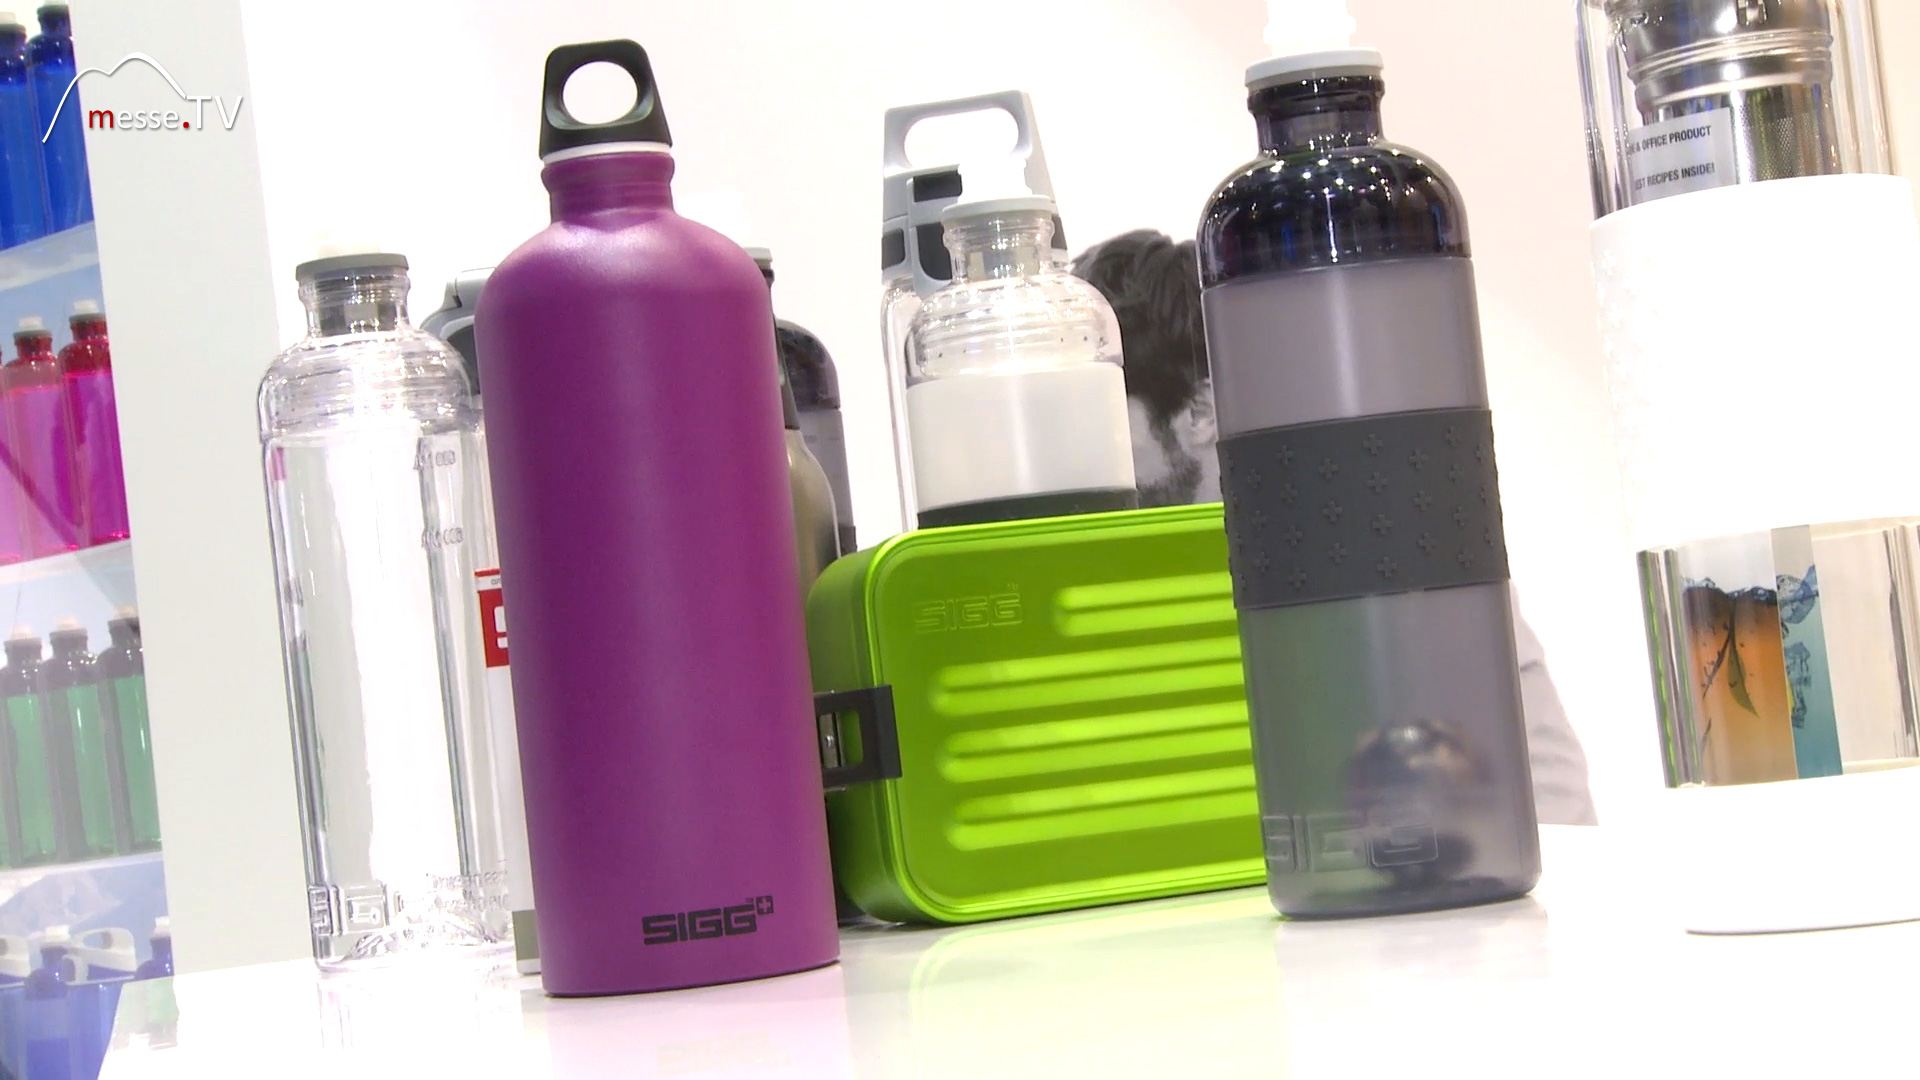 SIGG drinking bottles with touch tops Ispo Munich trade fair